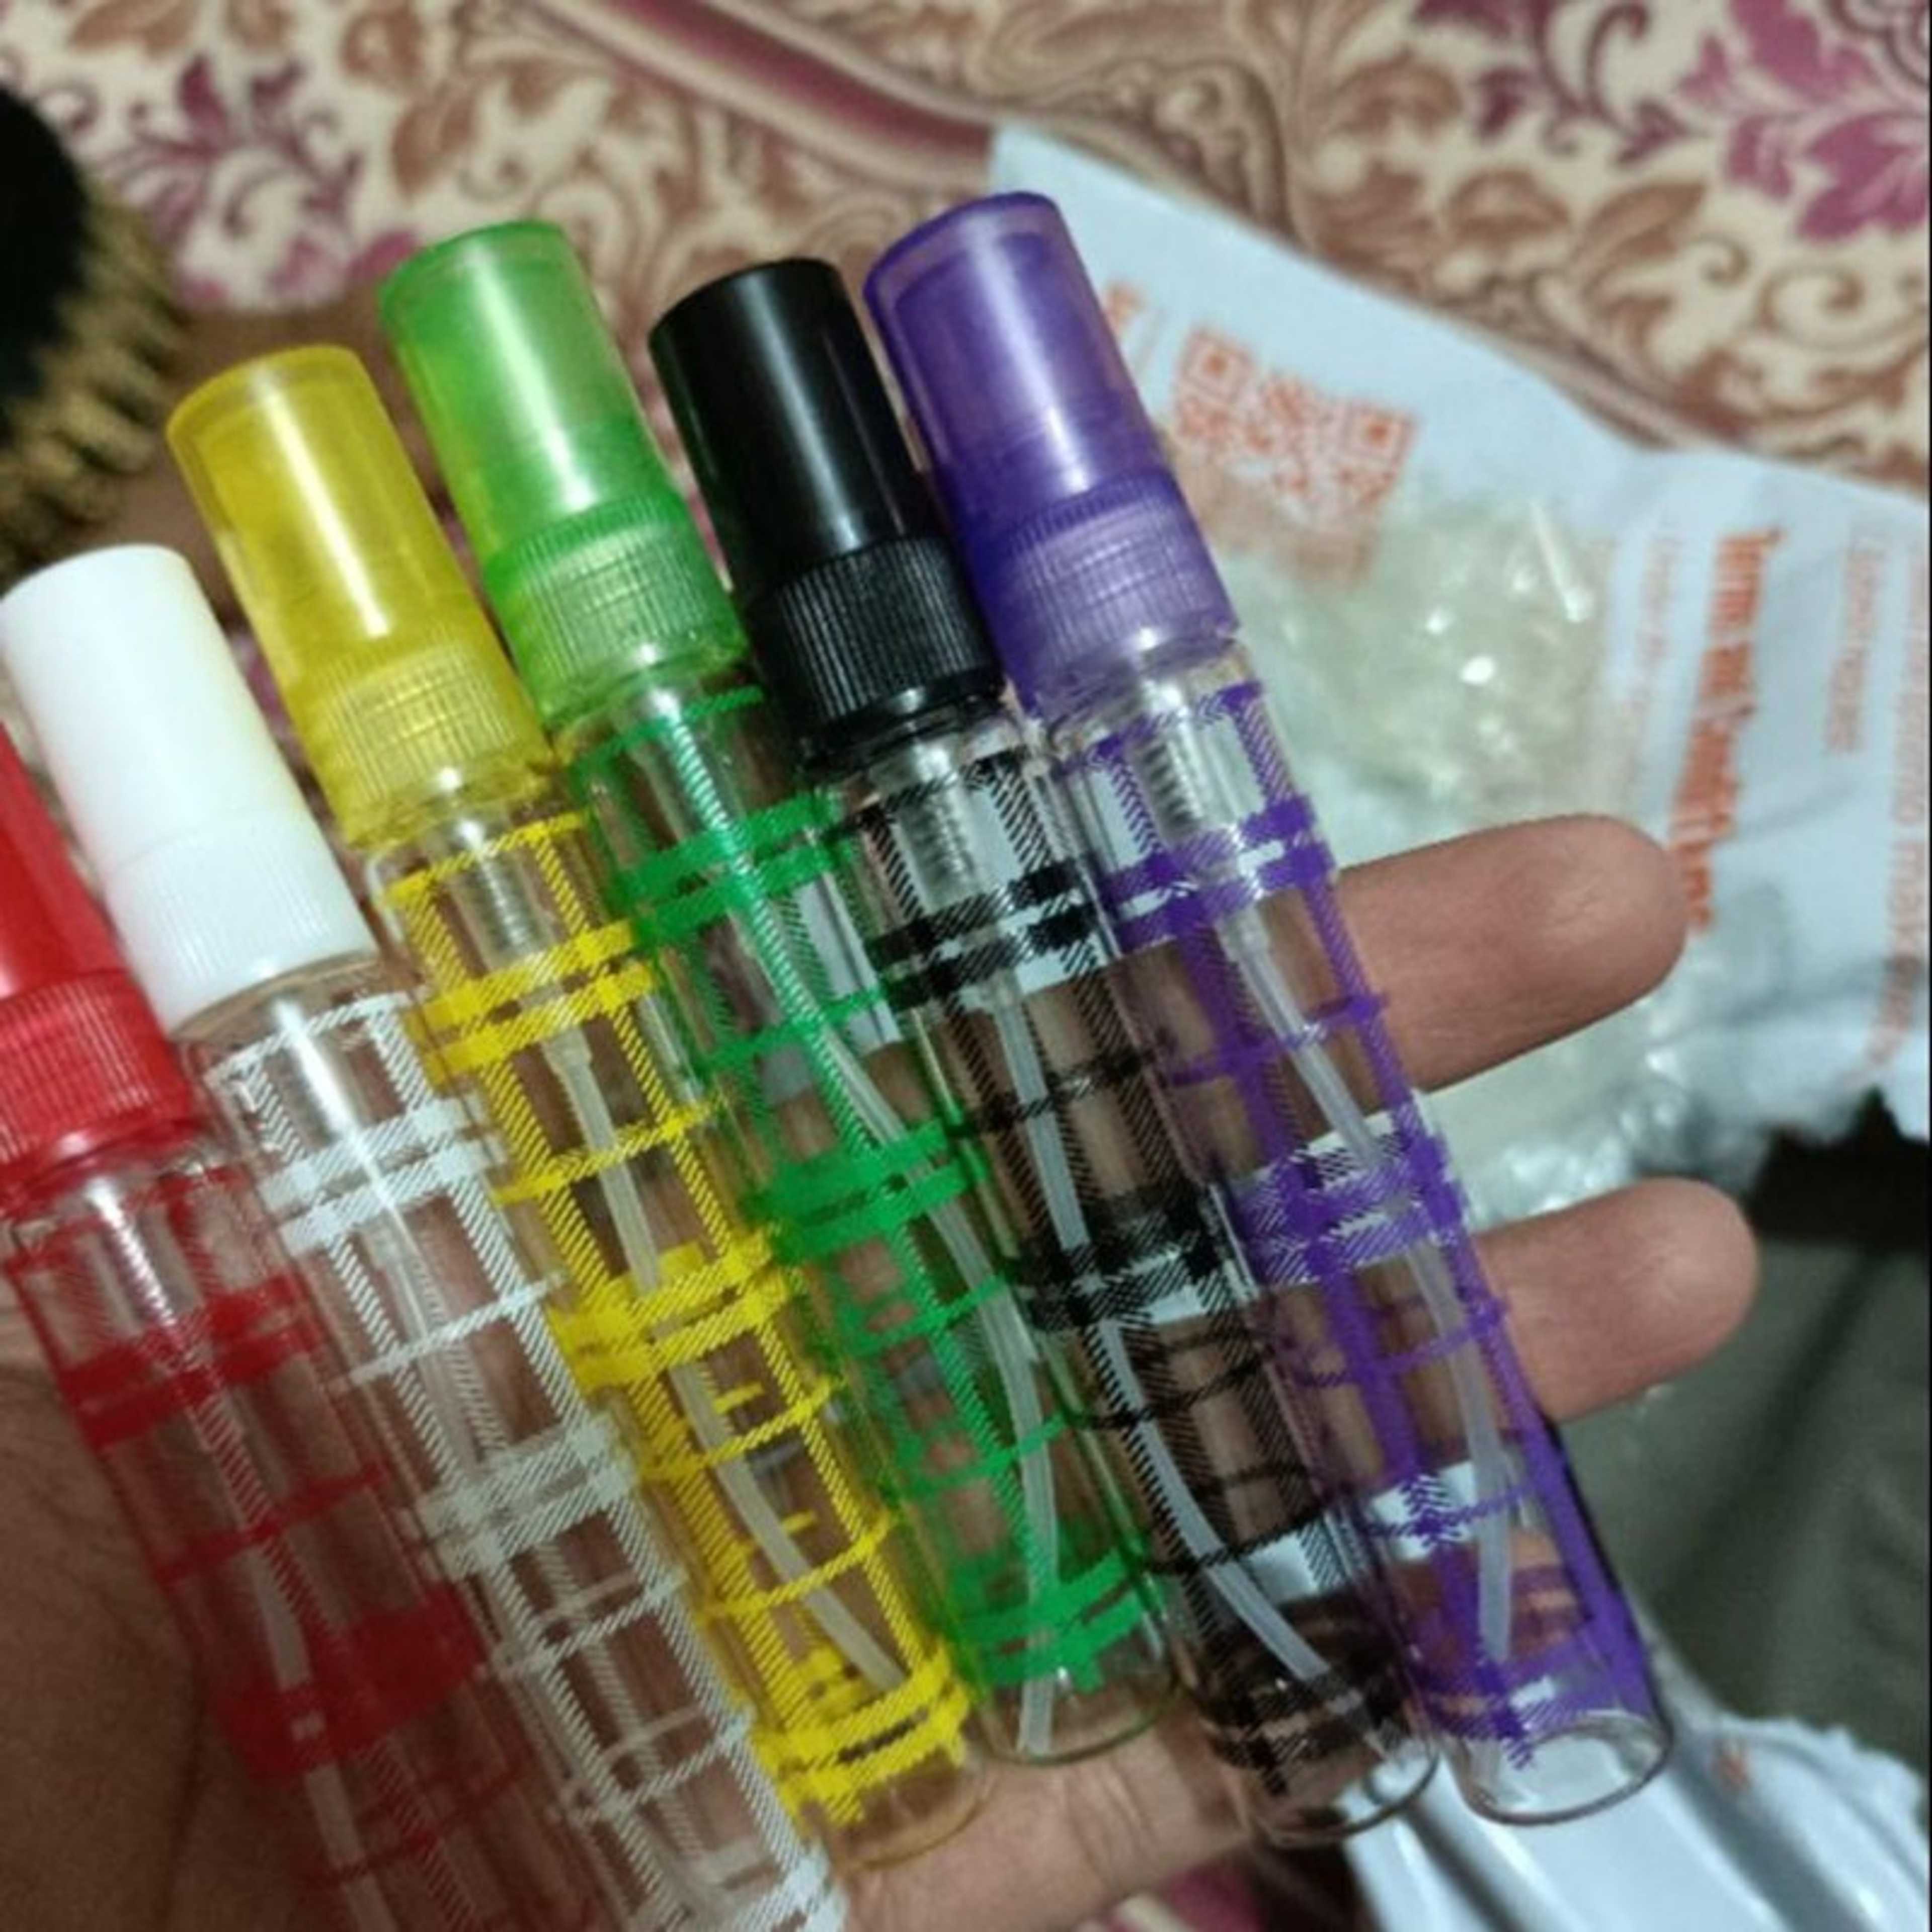 EMPTY BOTTLES PACK OF 5 Colorful Glass Perfume Atomizer Spray Bottles Perfume Refillable Atomizer Spray Bottles Purse, Pocket Luggage Pack of (5)  Empty Refillable for Lotion Toner Essential Oils Size(8ml )